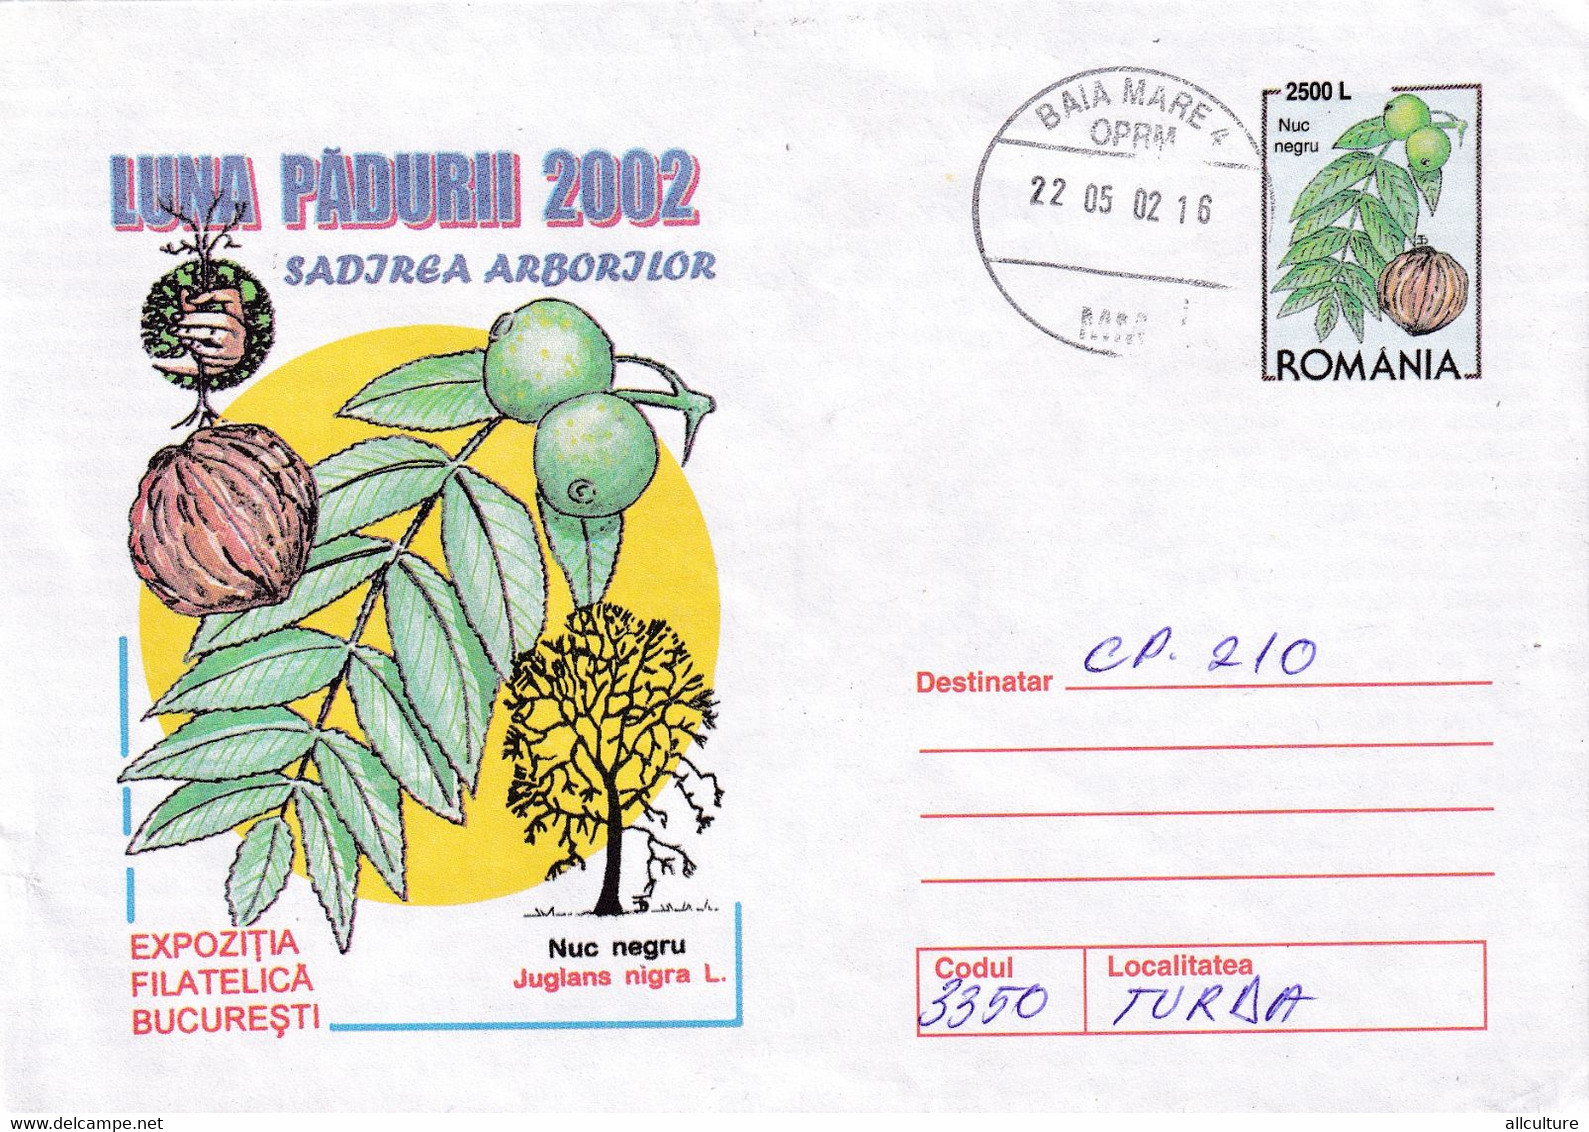 A9457- PHYLATELIC EXHIBITION FOREST MONTH 2002 JUGLANS NIGRA,2002 ROMANIA ROMANIAN POSTAGE STAMP COVER STATIONERY - Árboles